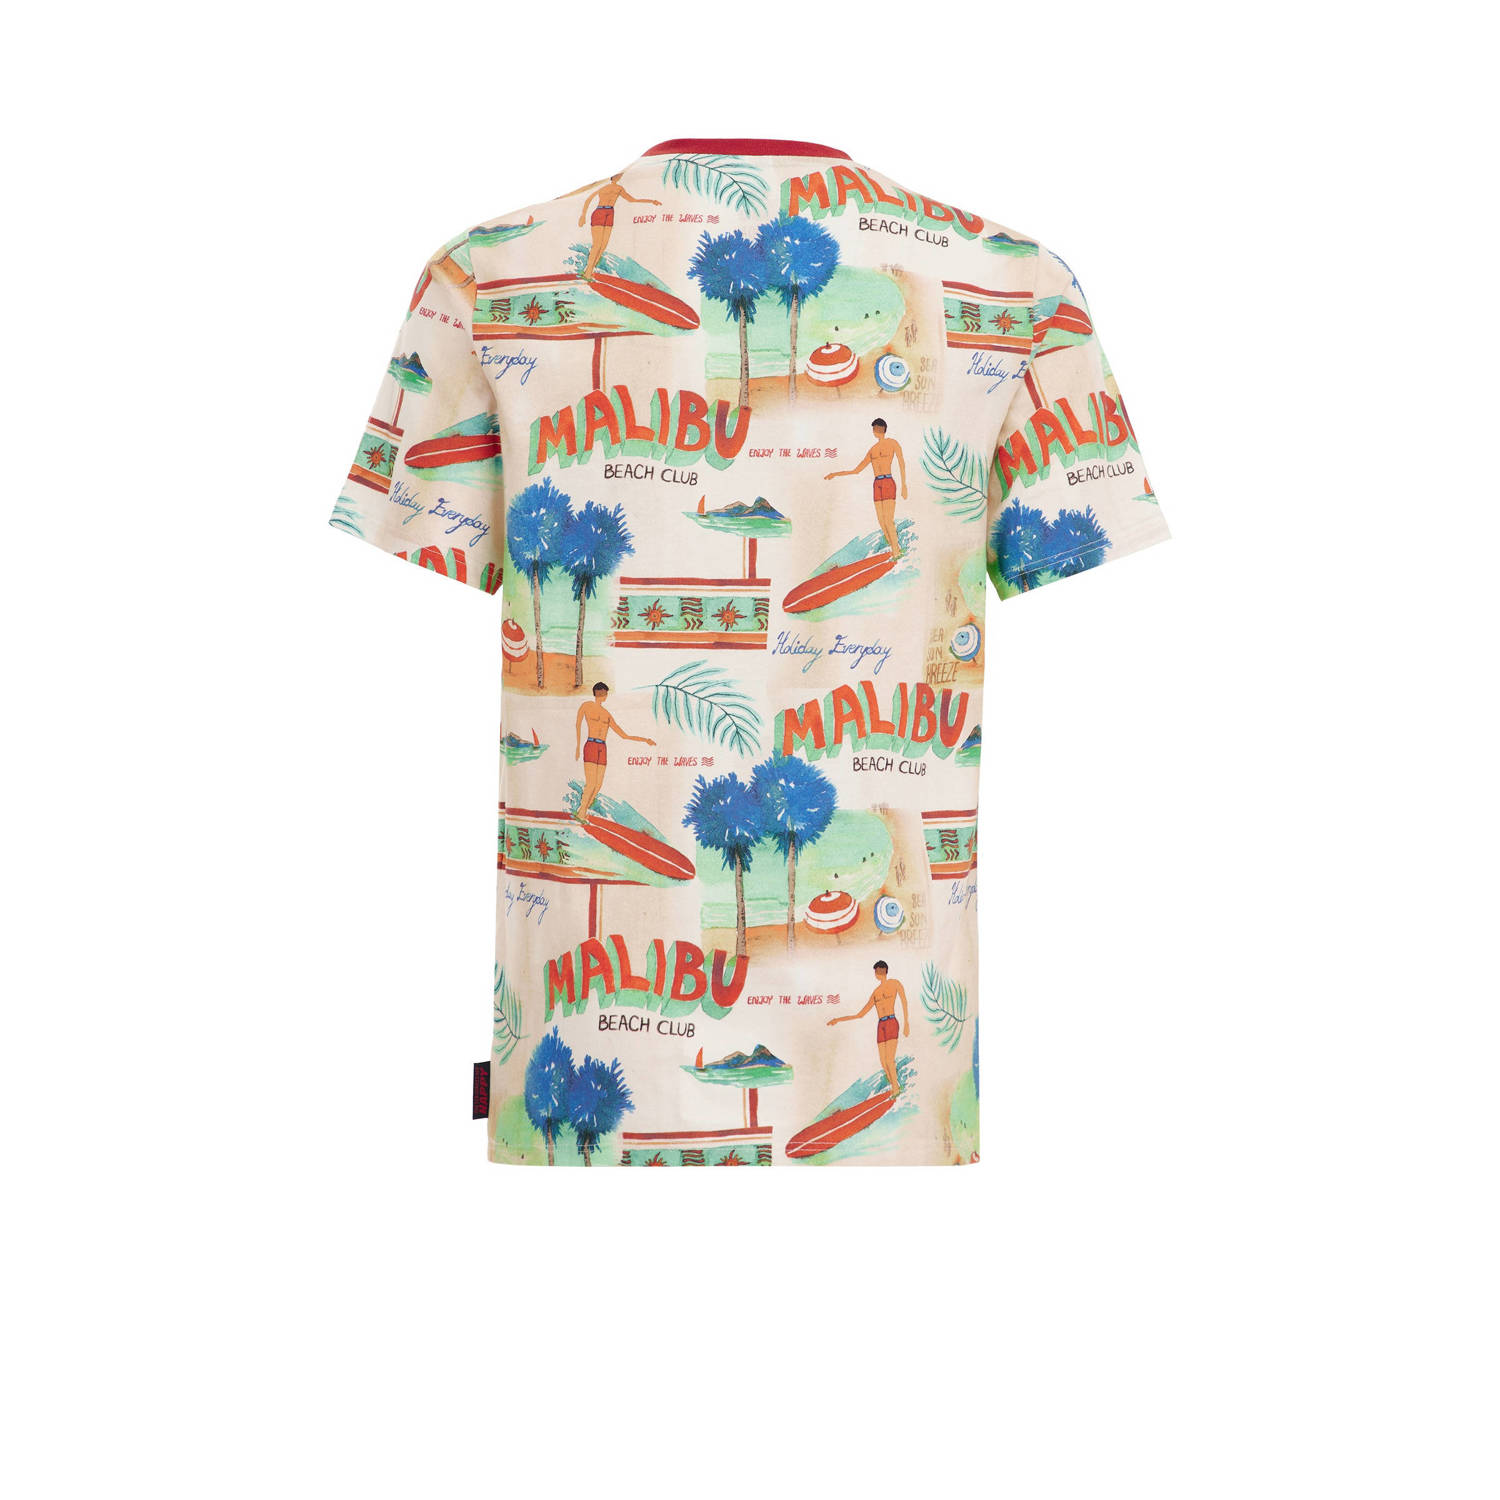 WE Fashion T-shirt met all over print multi